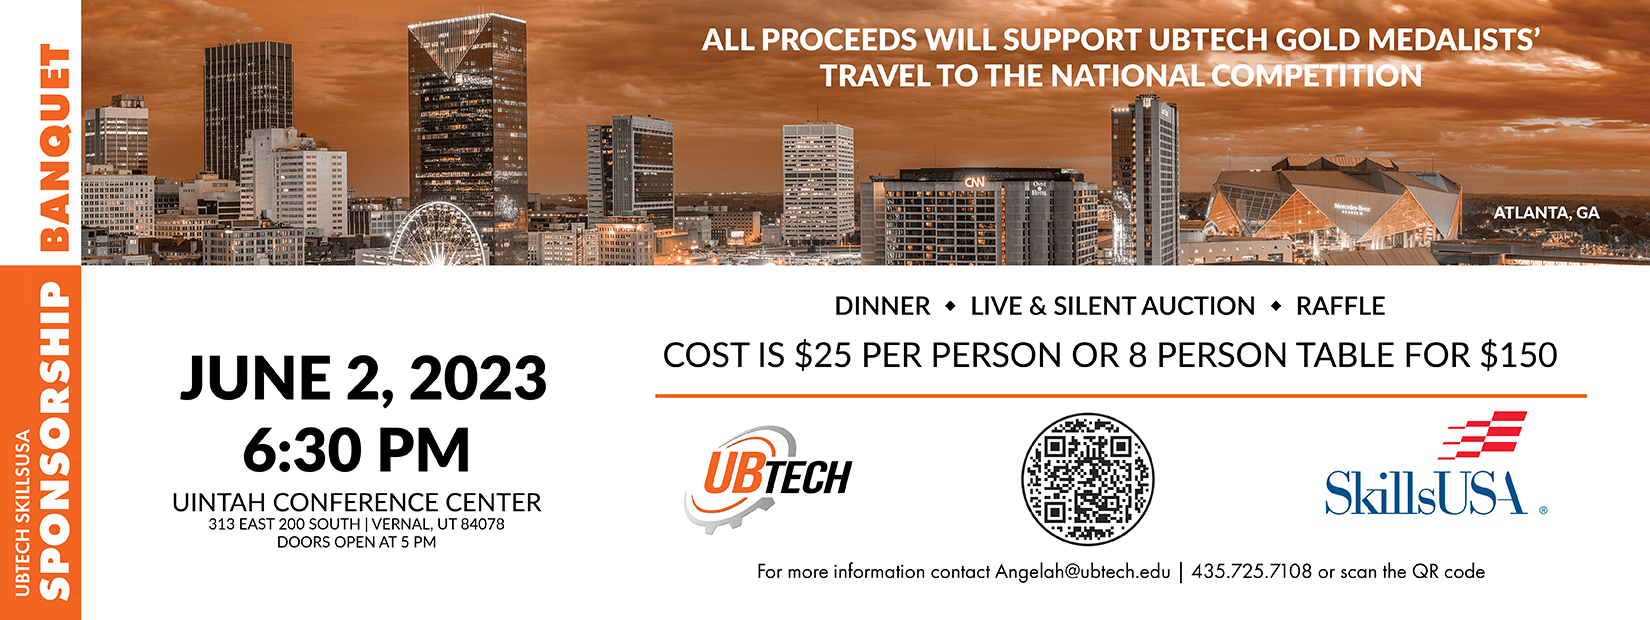 UBTech SkillsUSA Sponsorship Banquet. All proceeds will support UBTech Gold Medalists' travel to the national competition. June 2nd 2023 at 6:30pm. Uintah Conference Center, 313 East 200 South, Vernal, uT. Doors open at 5:00pm. Cost in $20 per person or an eight person table for $150, and there will be dinner, live and silent auction, and a raffle. For more info contact angelah@ubtech.edu.